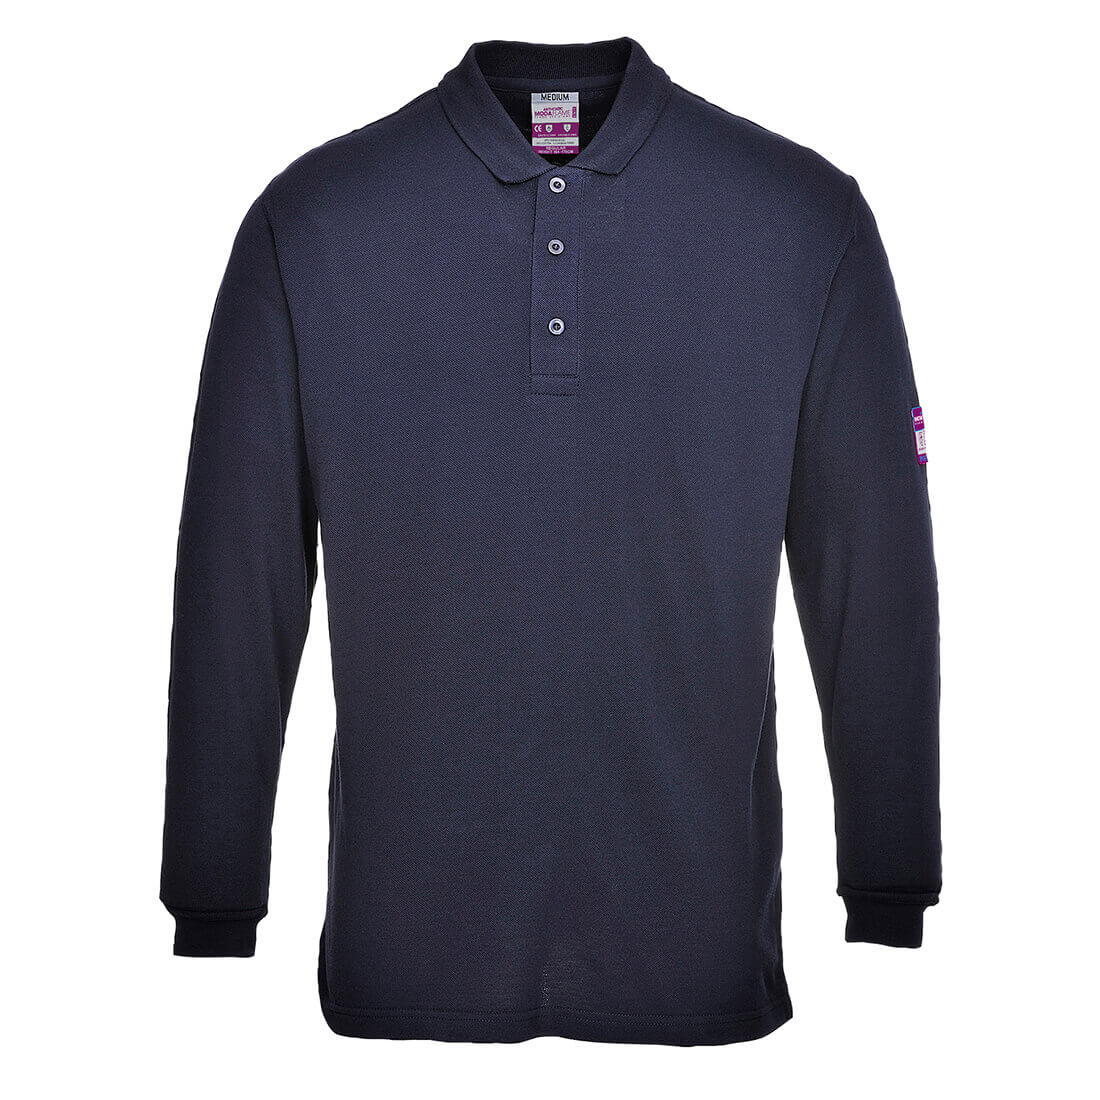 Image of Modaflame Mens Flame Resistant Antistatic Long Sleeve Polo Shirt Navy 2XL